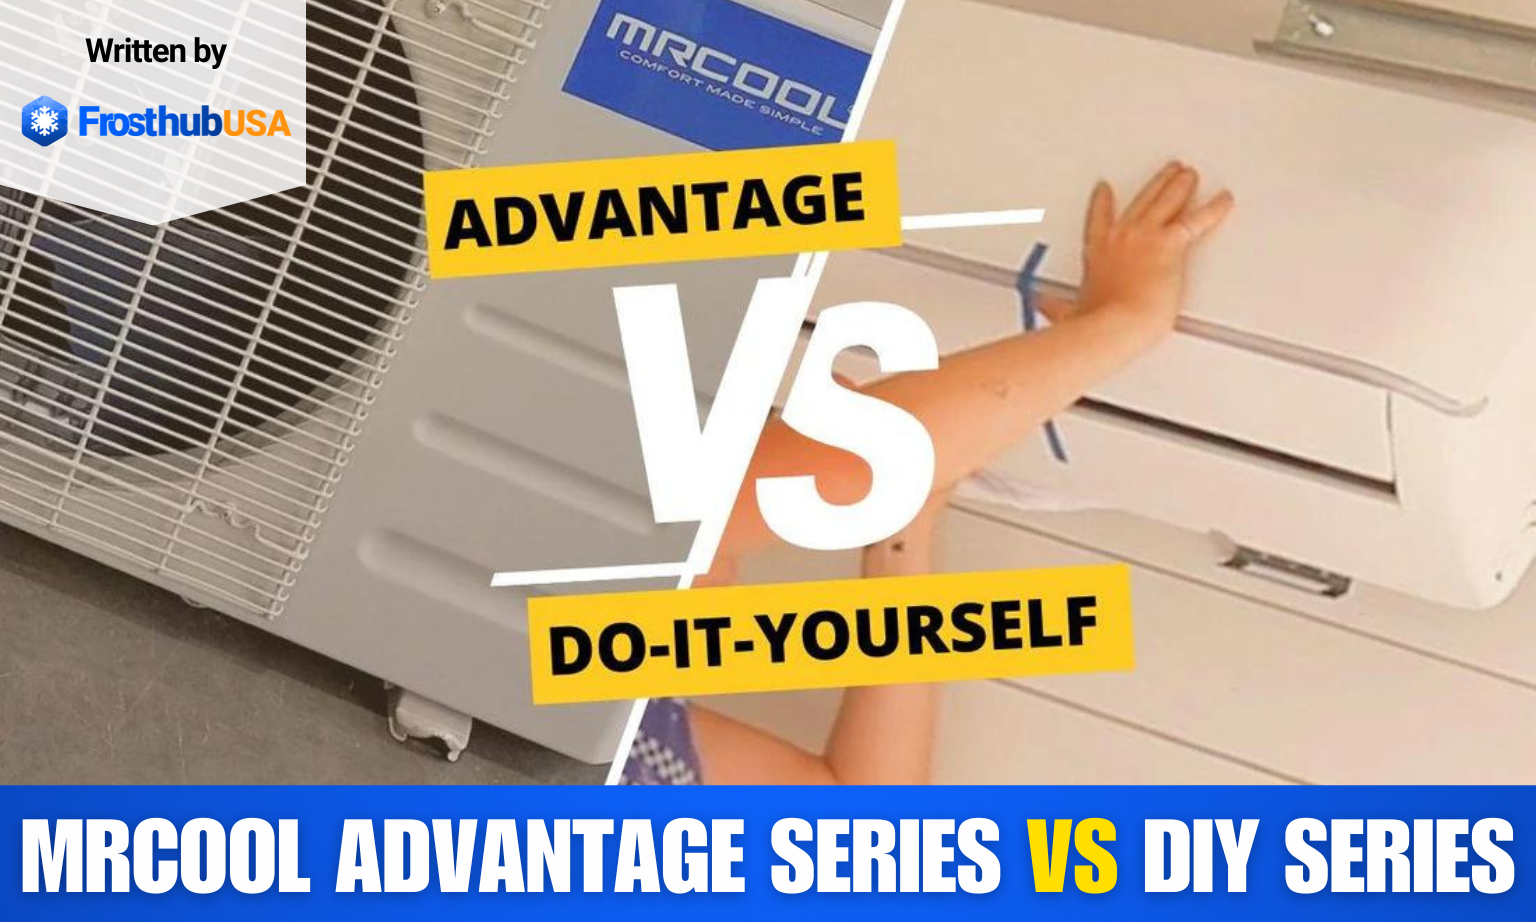 MRCOOL Advantage Series vs DIY Series: Which provides value for money? - FrosthubUSA